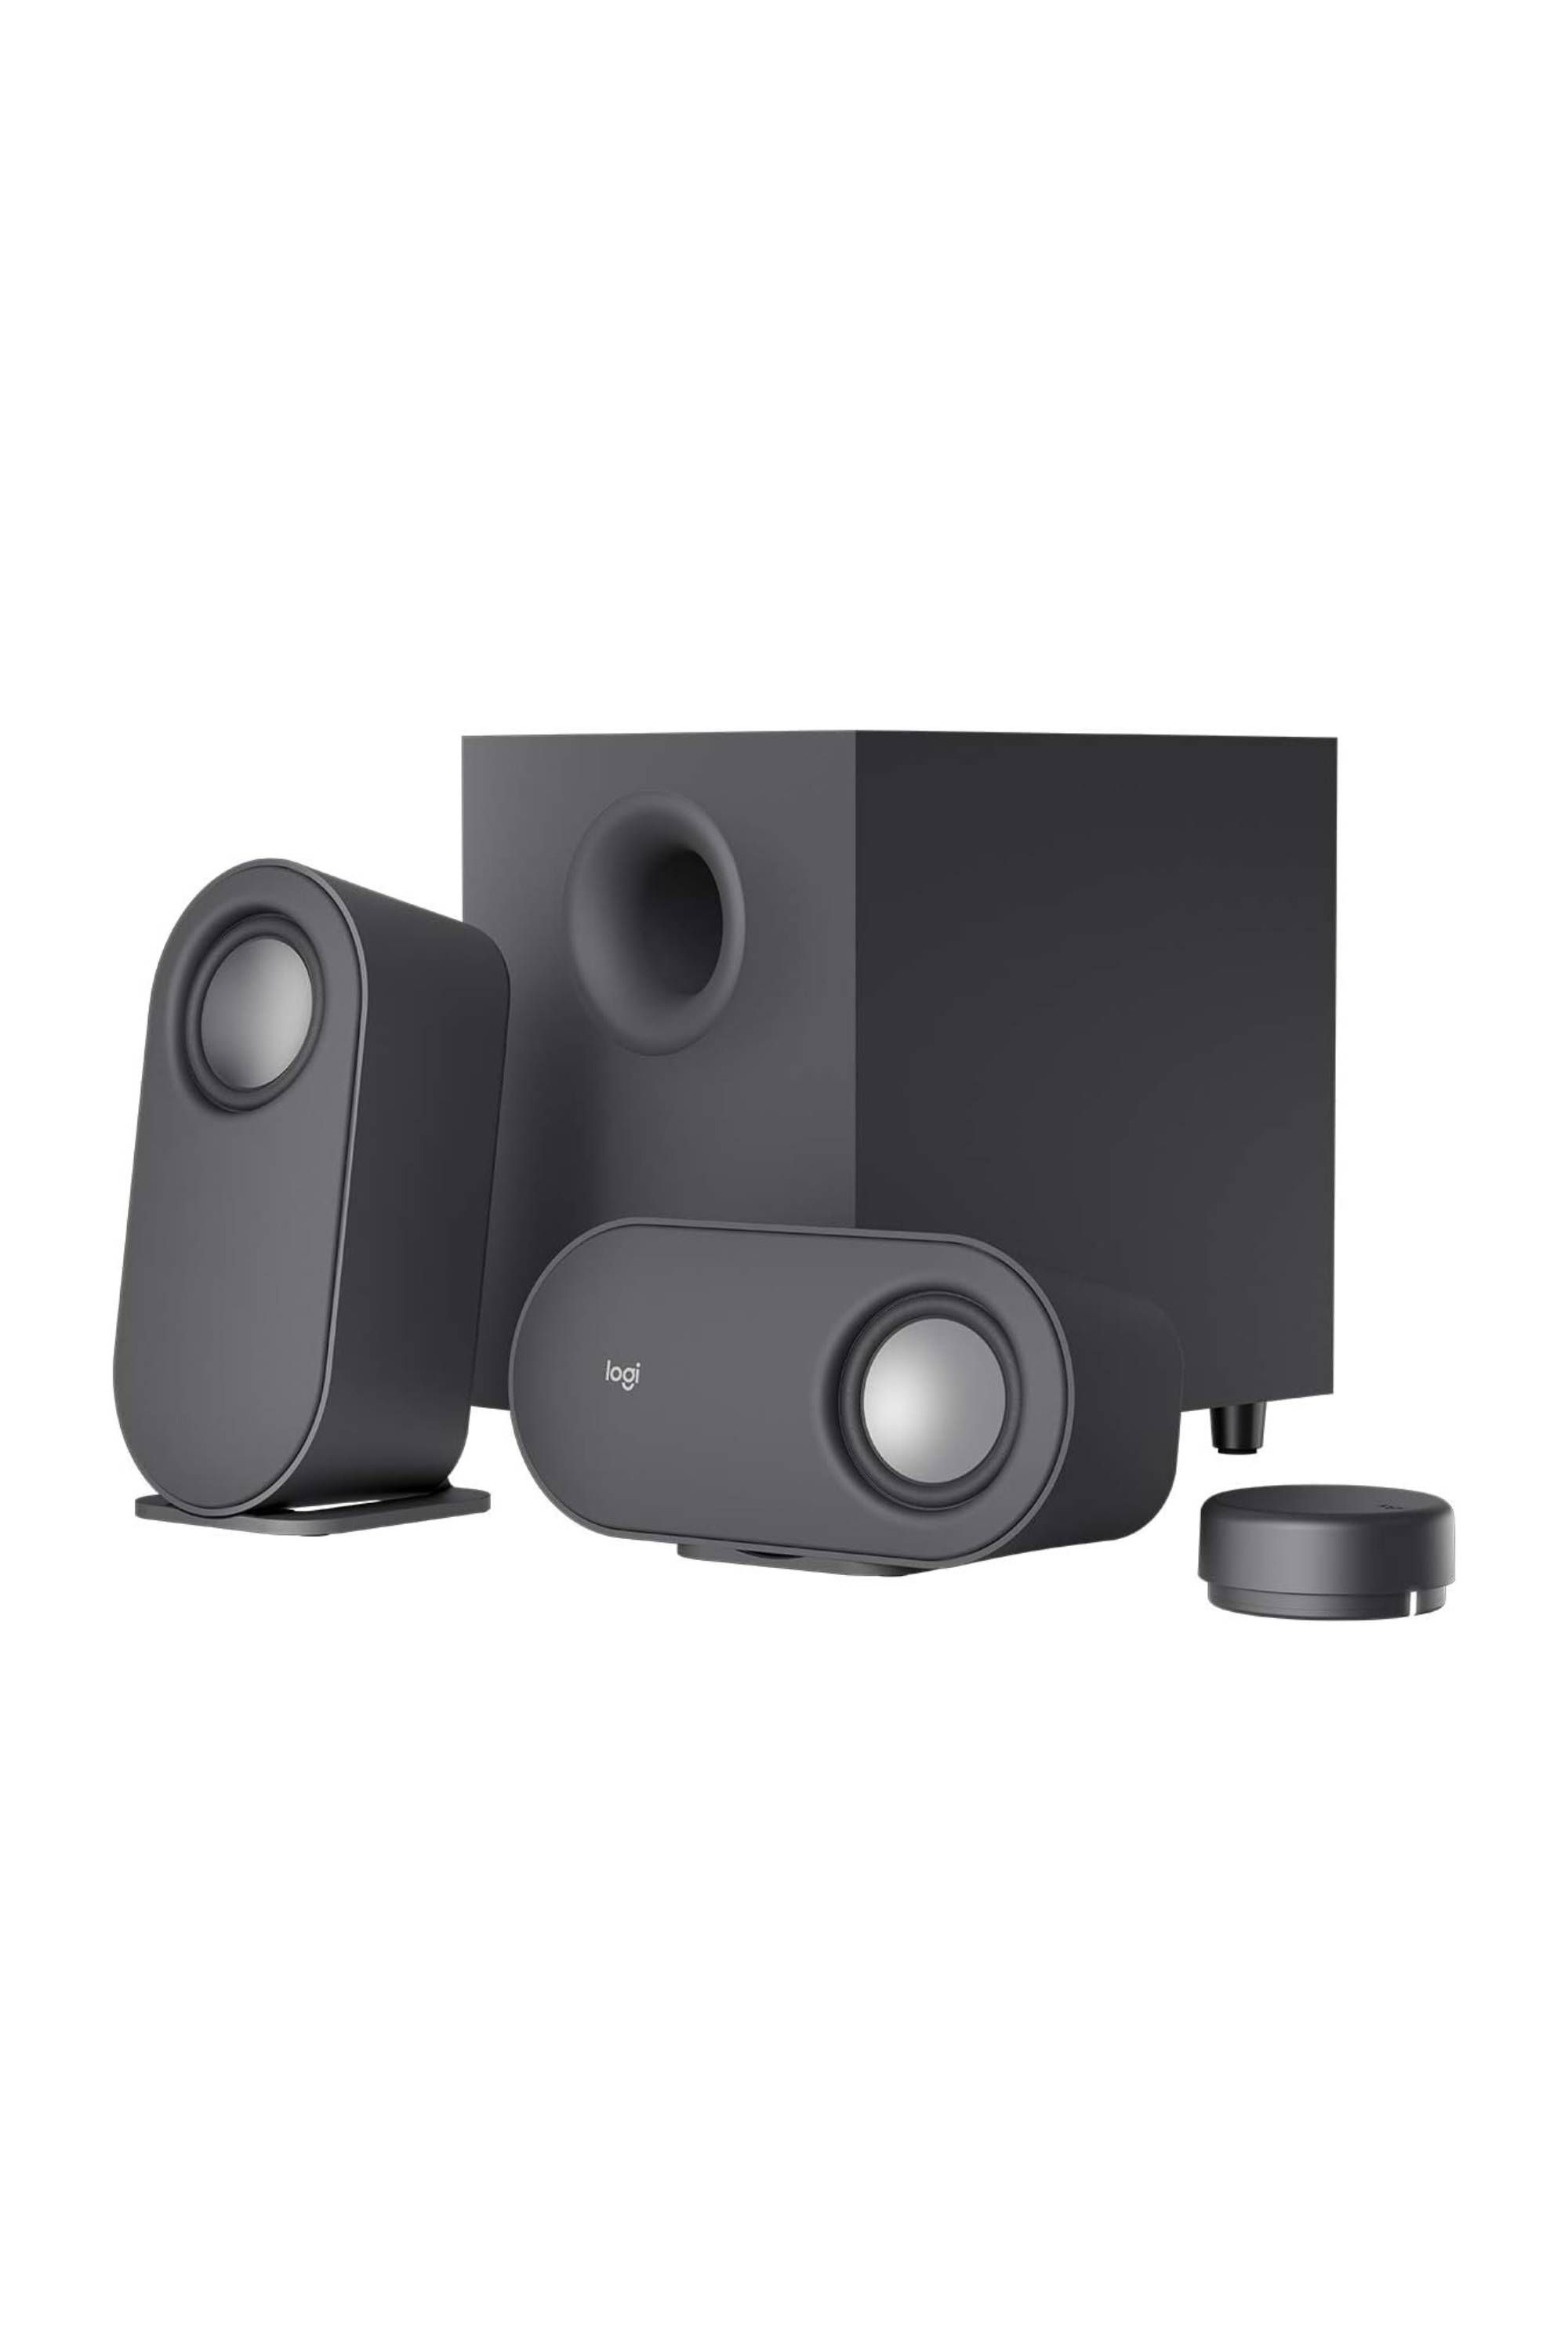 Arena 9, The world's first 5.1 gaming surround speaker system